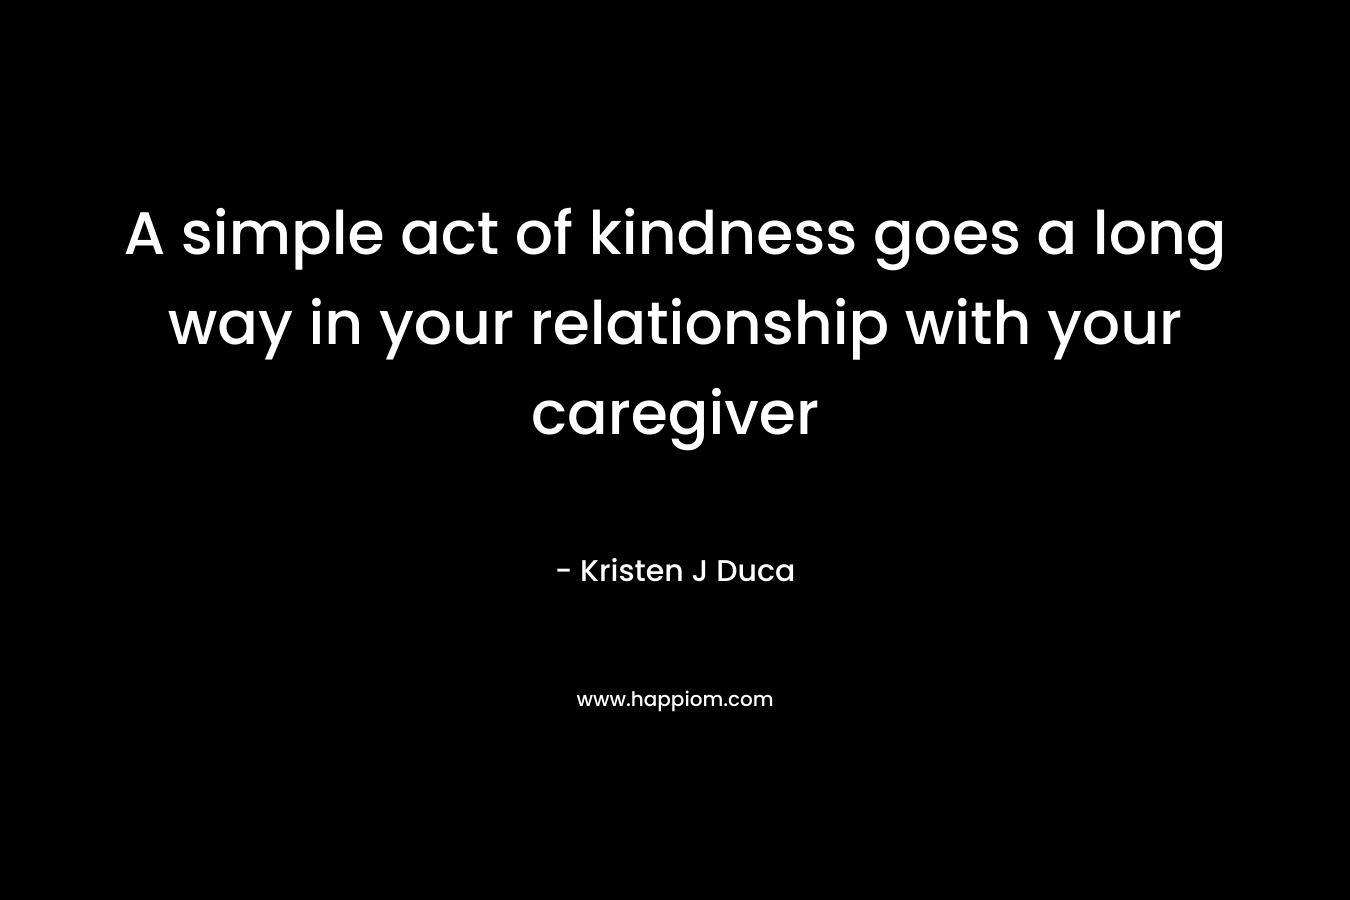 A simple act of kindness goes a long way in your relationship with your caregiver – Kristen J Duca